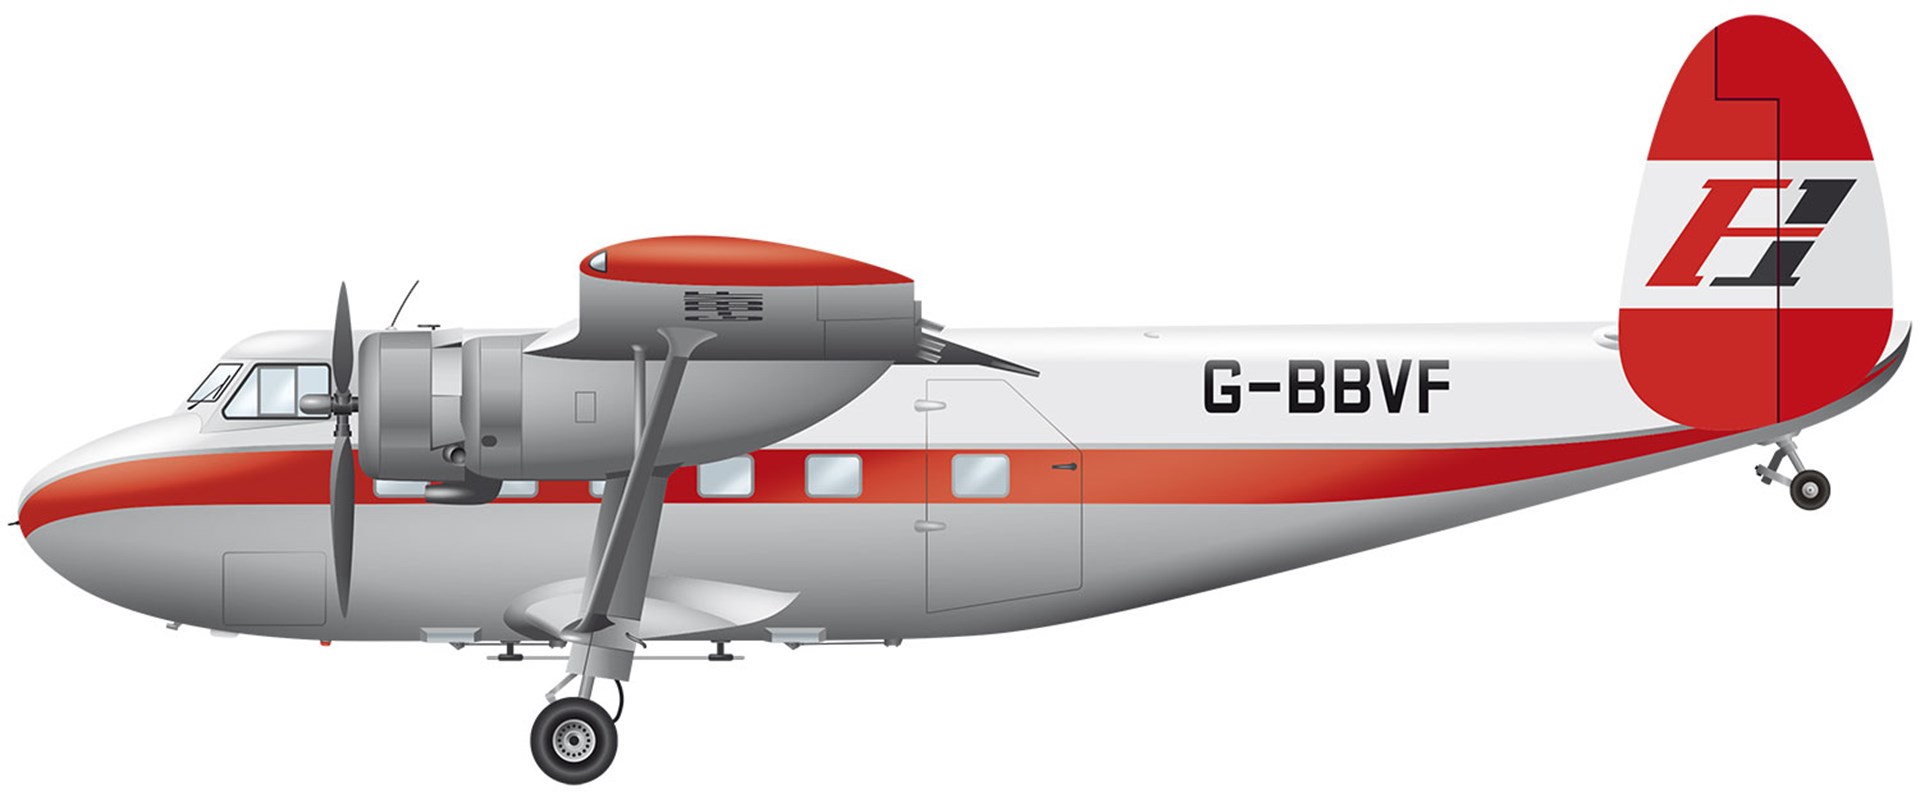 A red and white Scottish Aviation Twin Pioneer aircraft. 